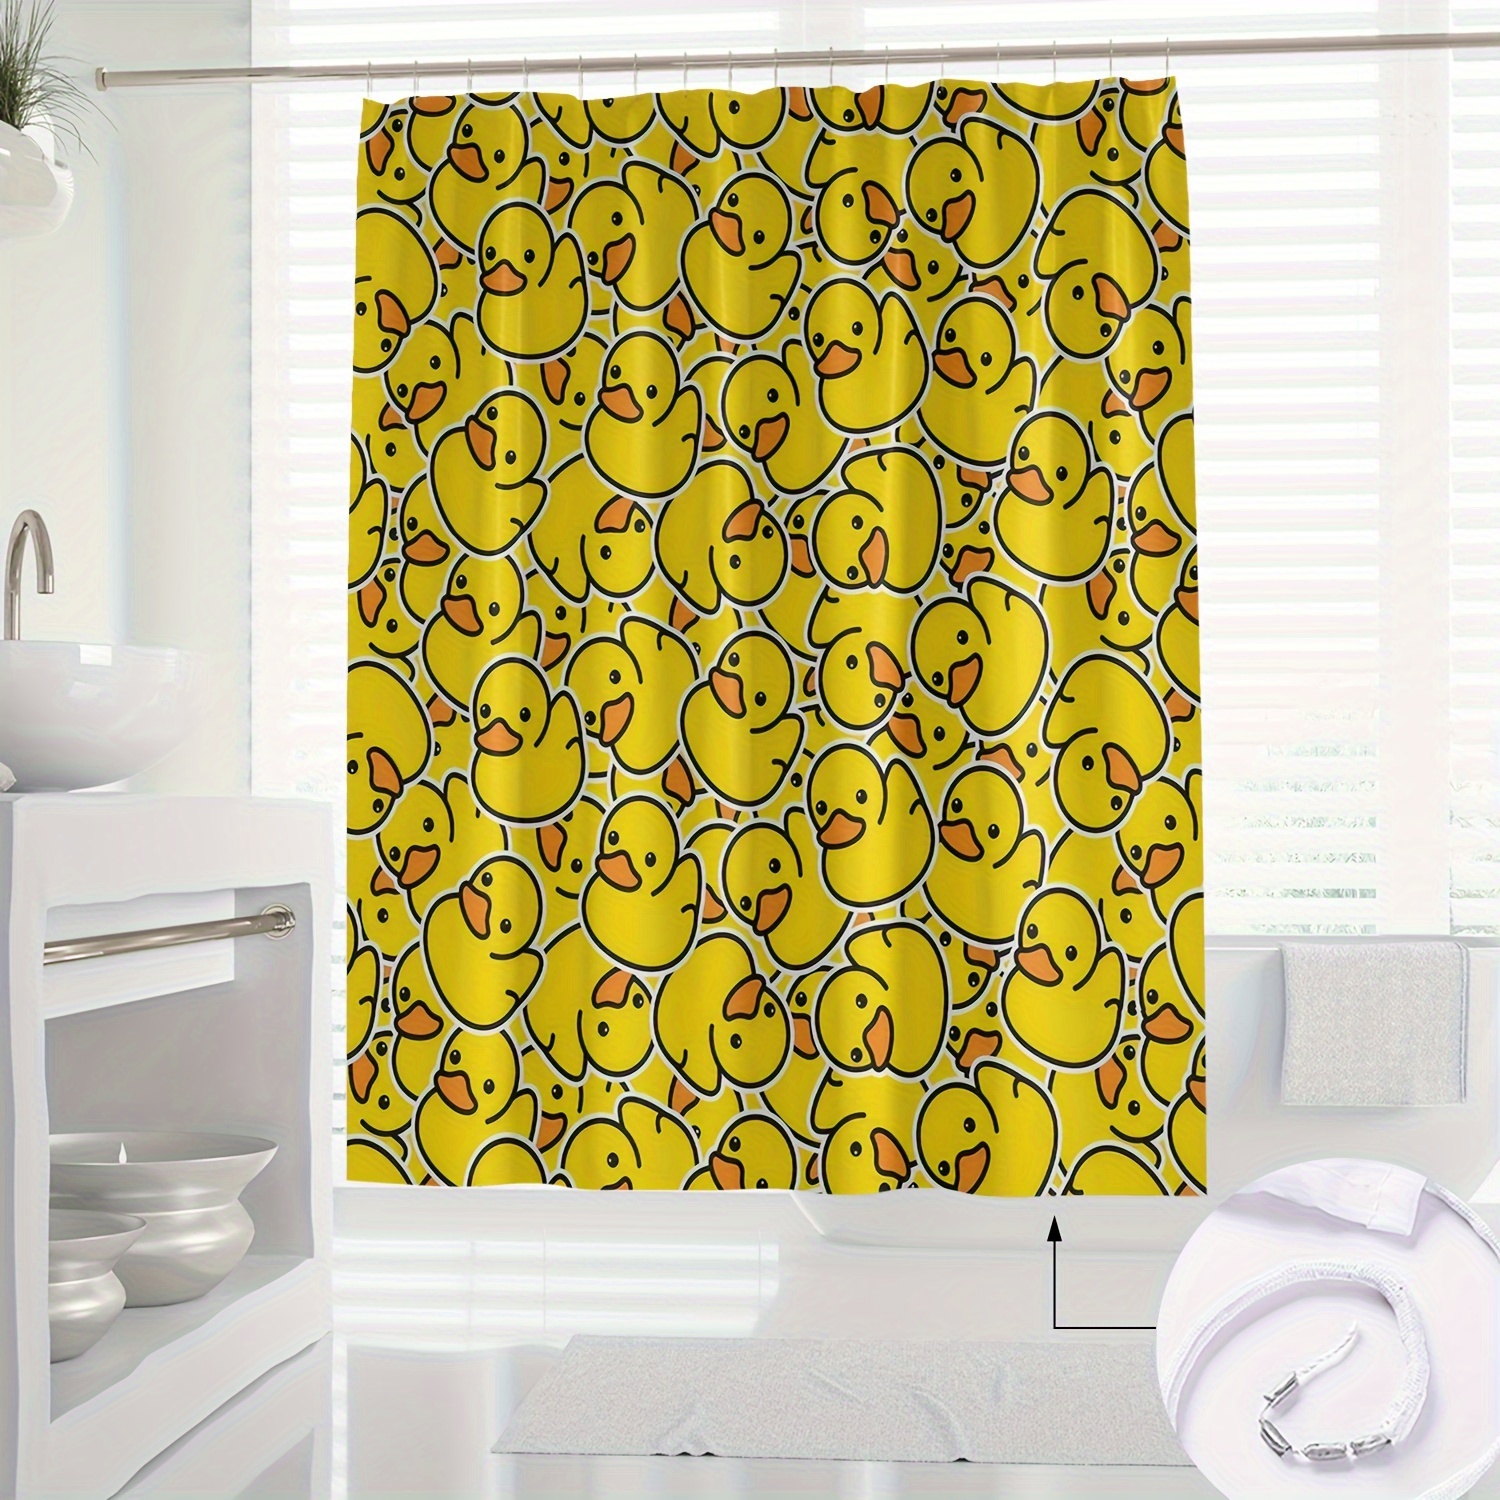 

1pc Cute Yellow Duck Cartoon Shower Curtain - Waterproof, Machine Washable With Hooks Included - Modern Nordic Bathroom Decor